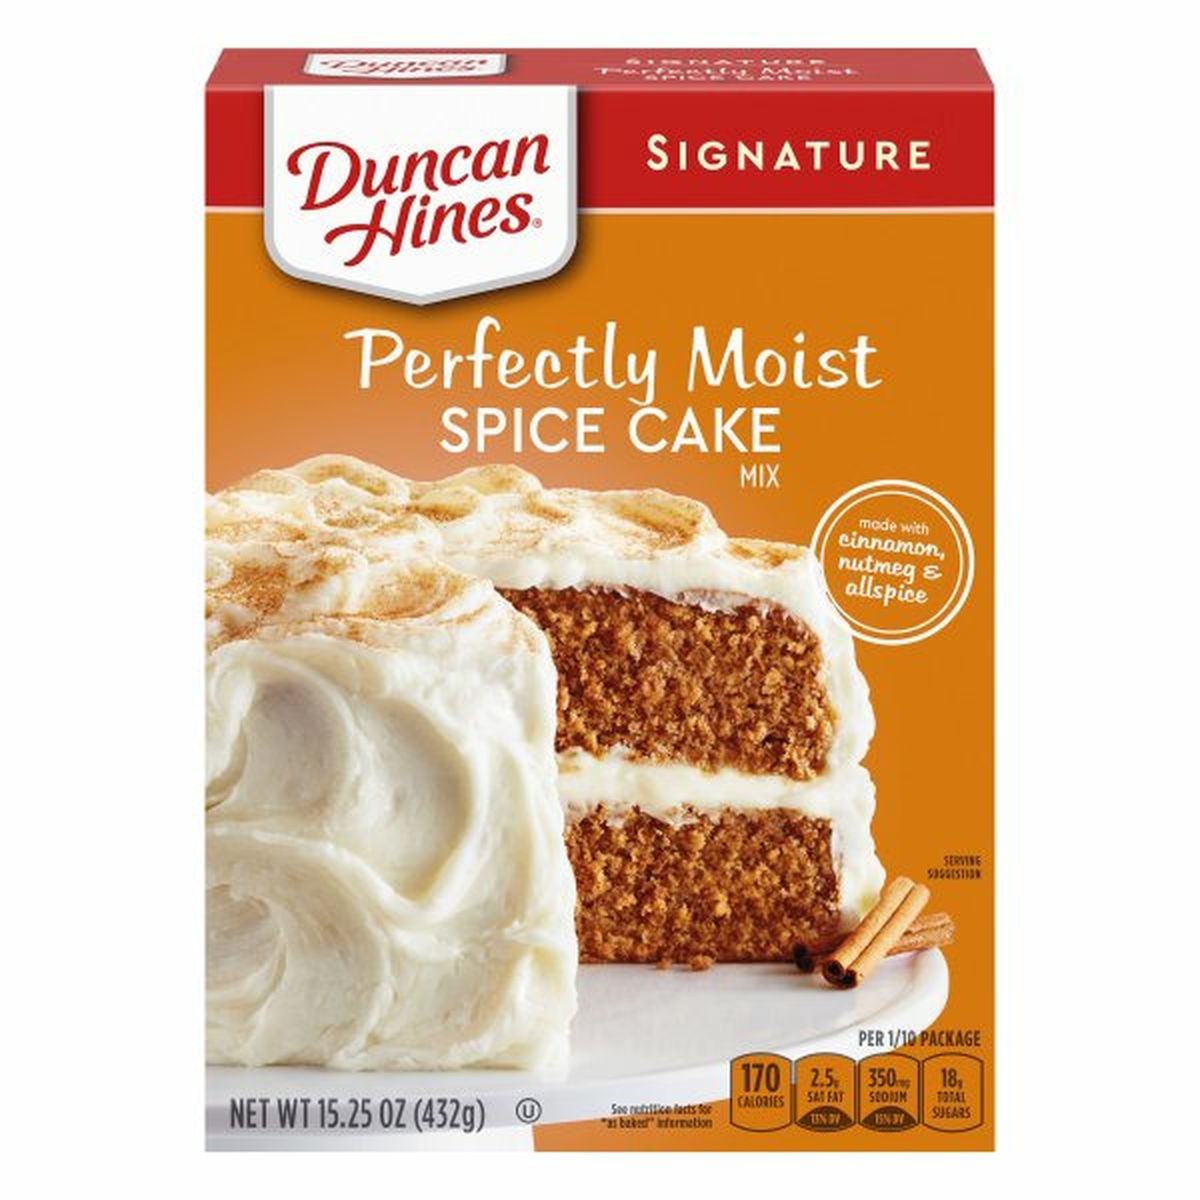 Calories in Duncan Hines Signature Cake Mix, Spice Cake, Perfectly Moist